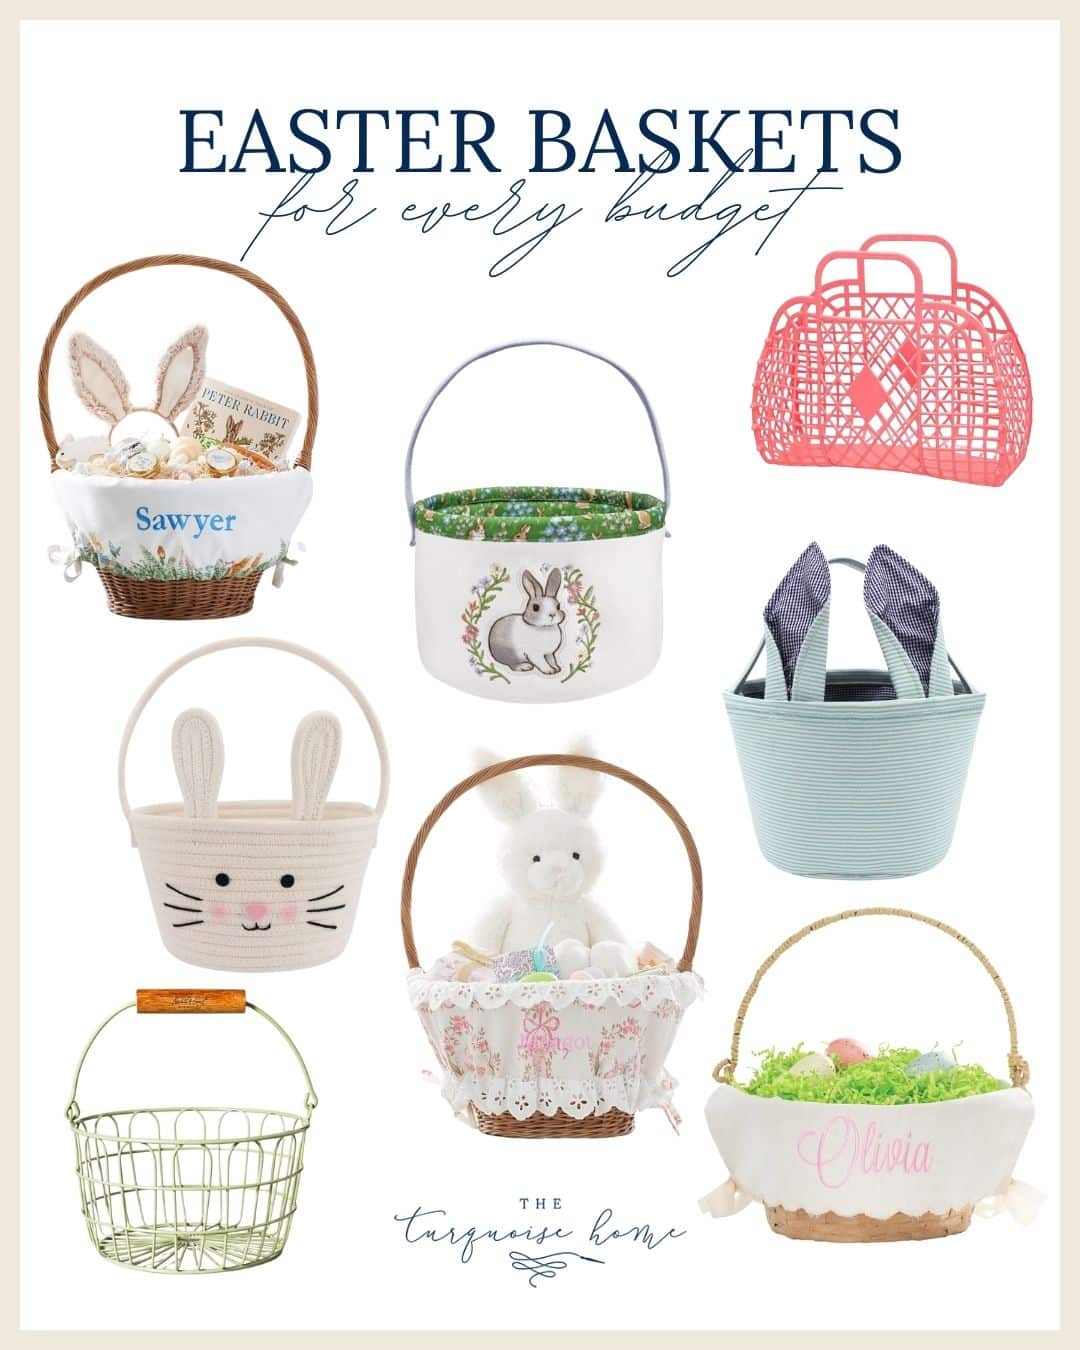 Easter Baskets for very budget